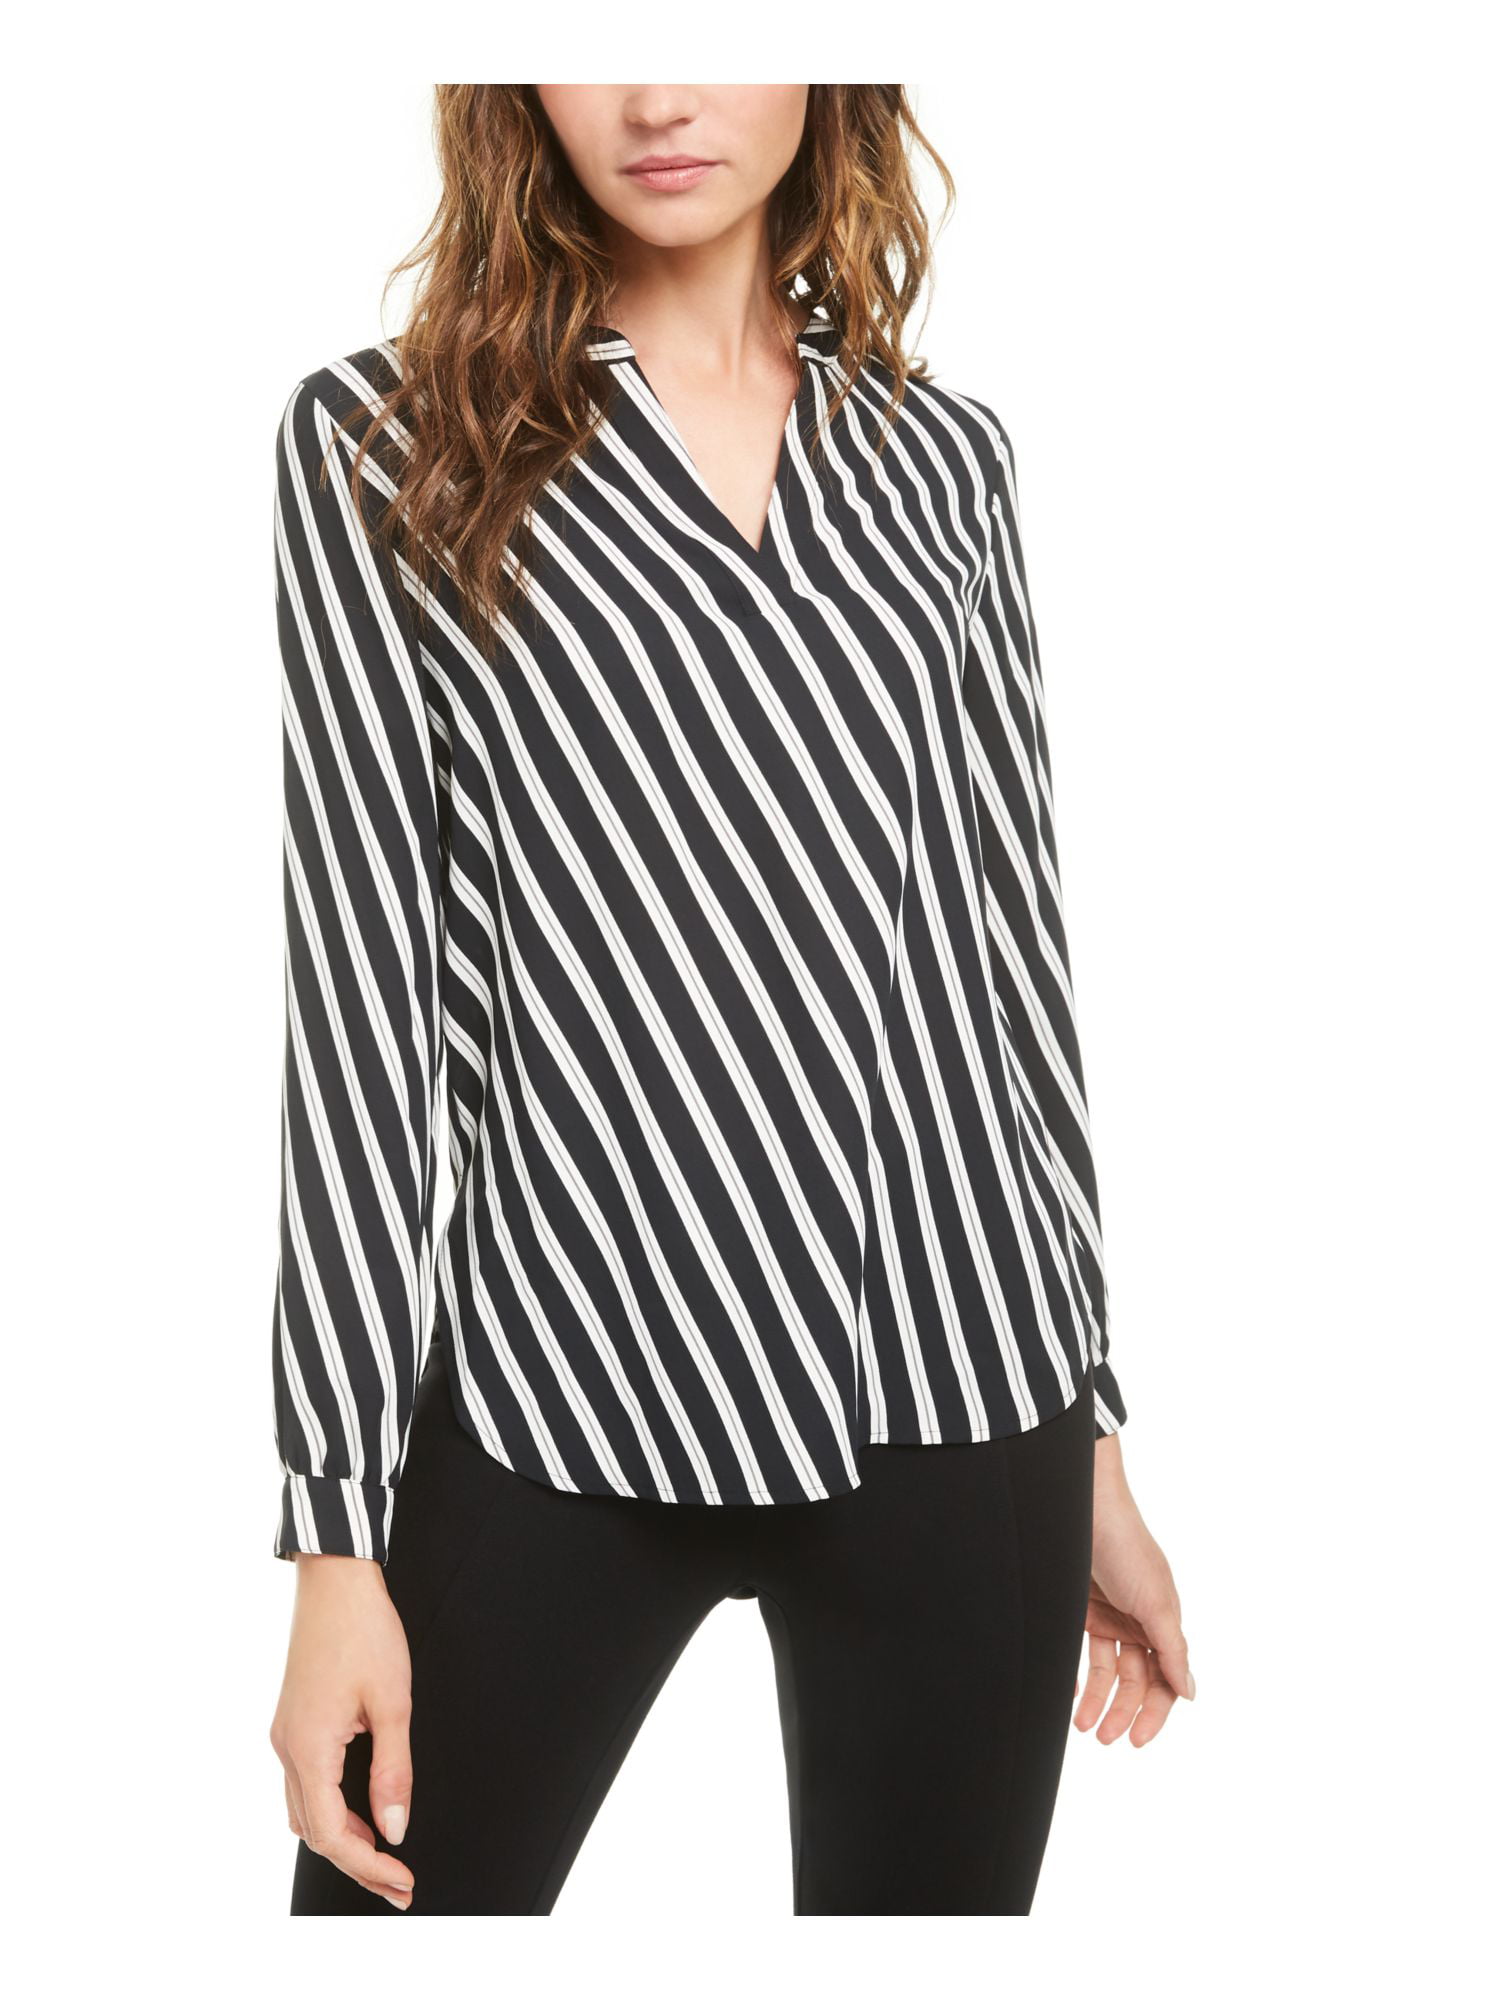 Fashion Blouses Long Sleeve Blouses Anne Klein Long Sleeve Blouse black-white striped pattern casual look 